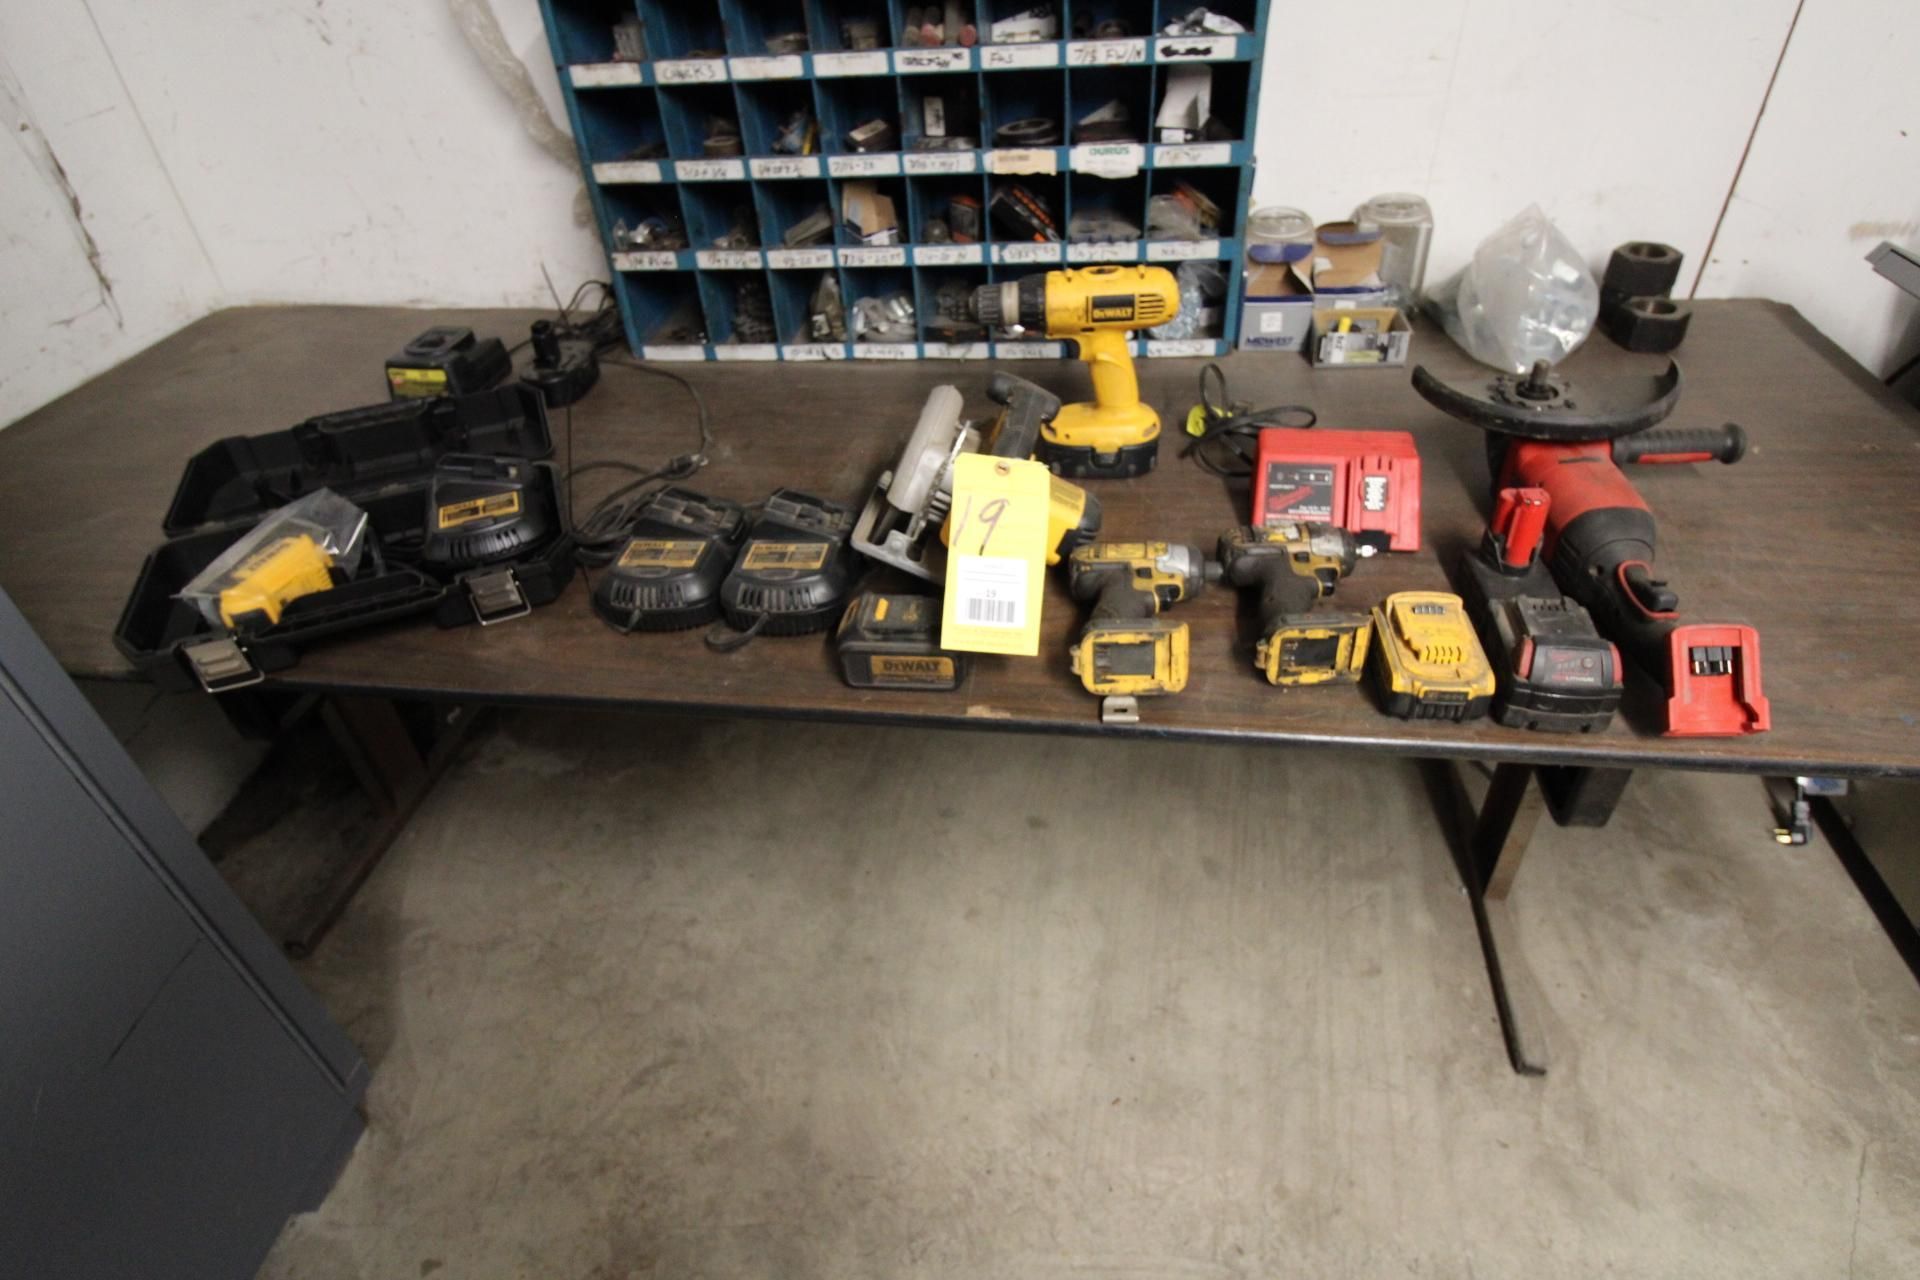 LOT OF BATTERY POWERED TOOLS: (1) Dewalt hand saw, drill, batteries, chargers & Milwaukee grinder,